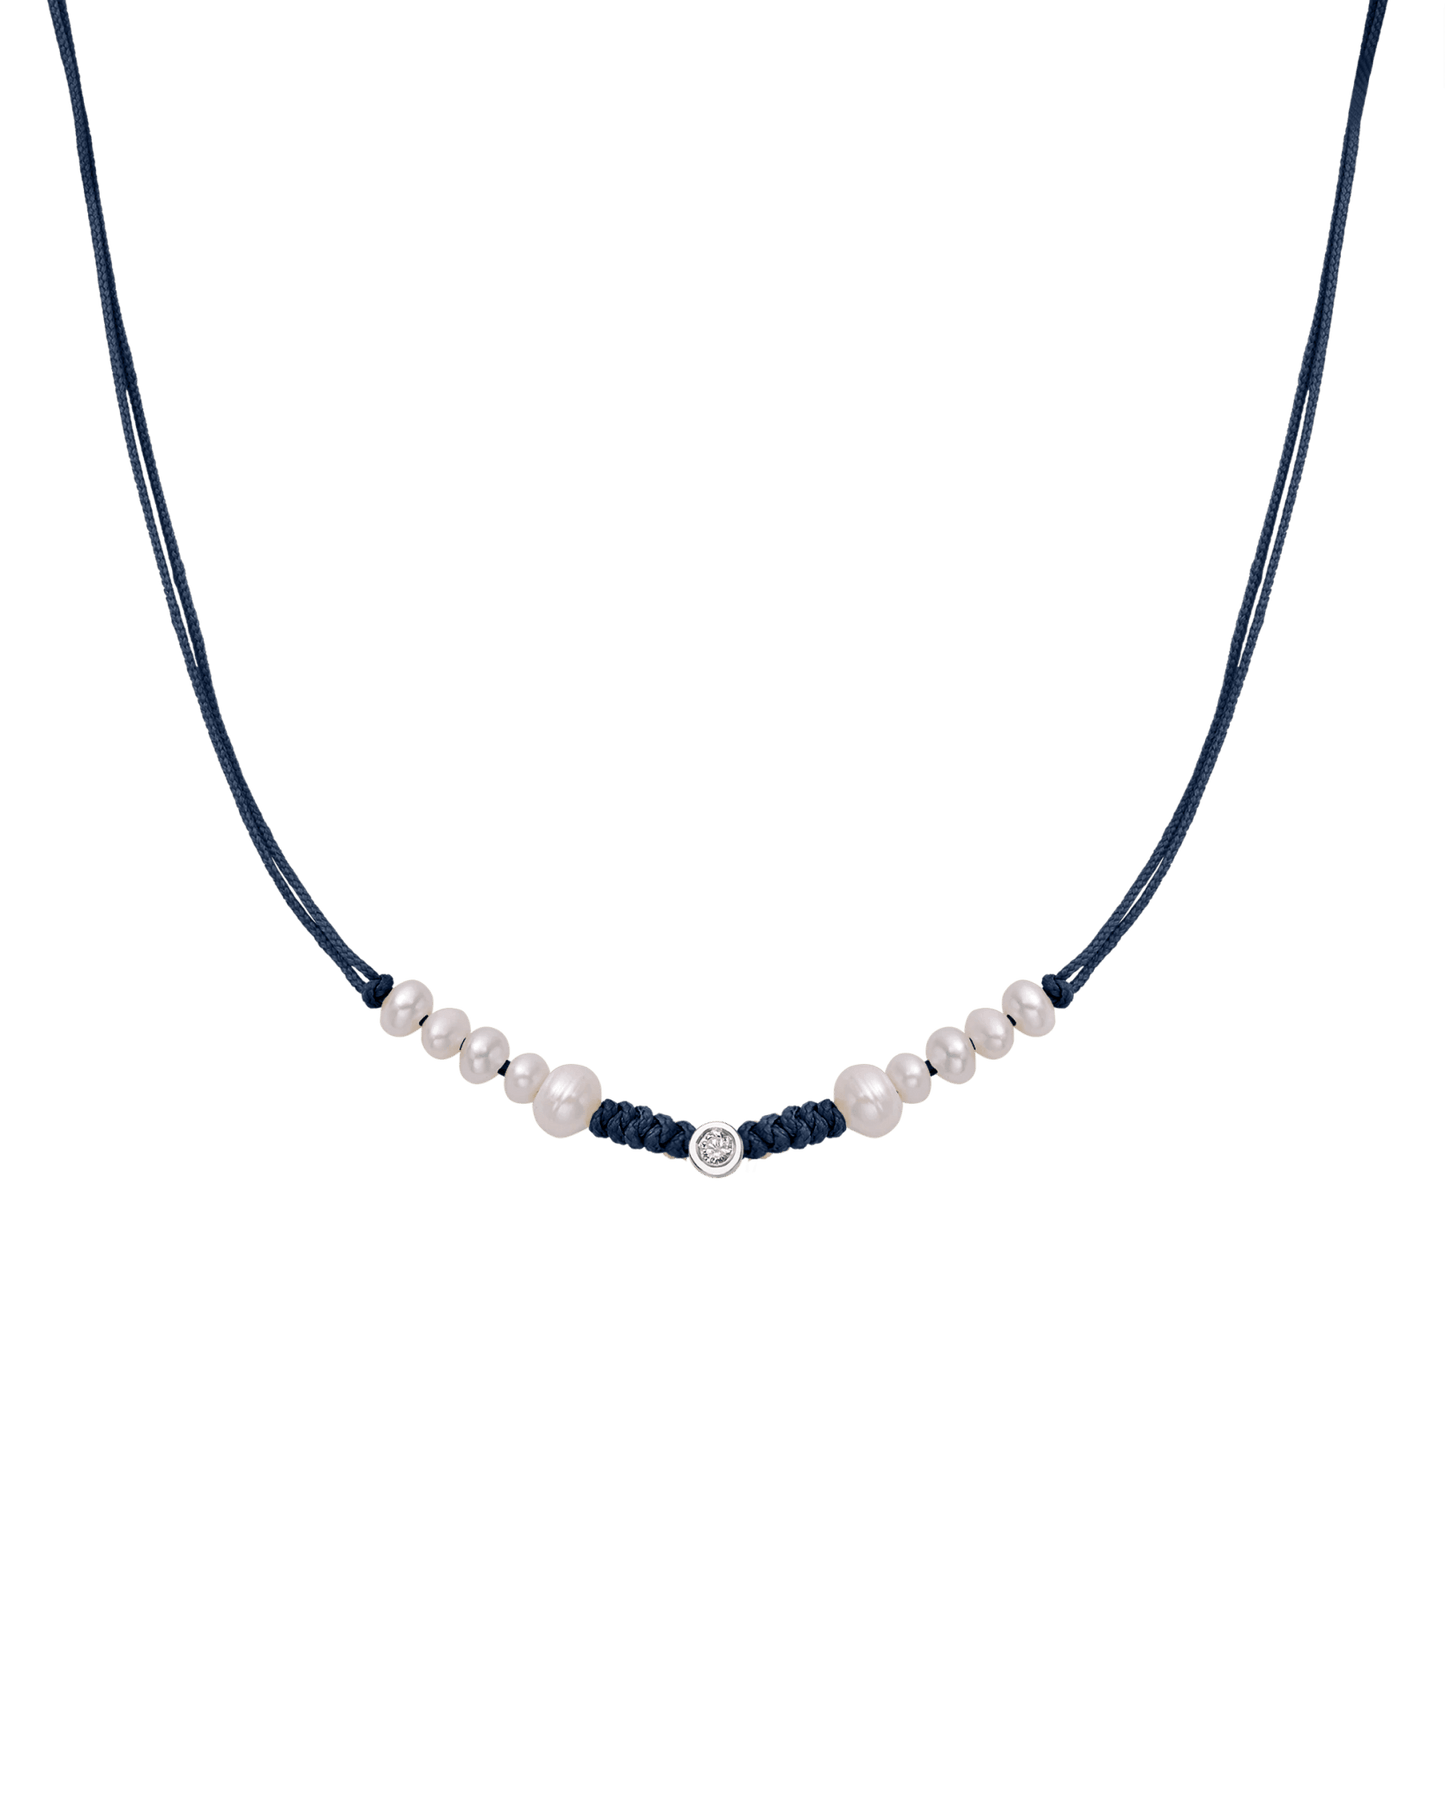 Ten Natural Pearl String of Love Necklace - 14K White Gold Necklaces 14K Solid Gold Navy Blue Medium: 0.04ct 